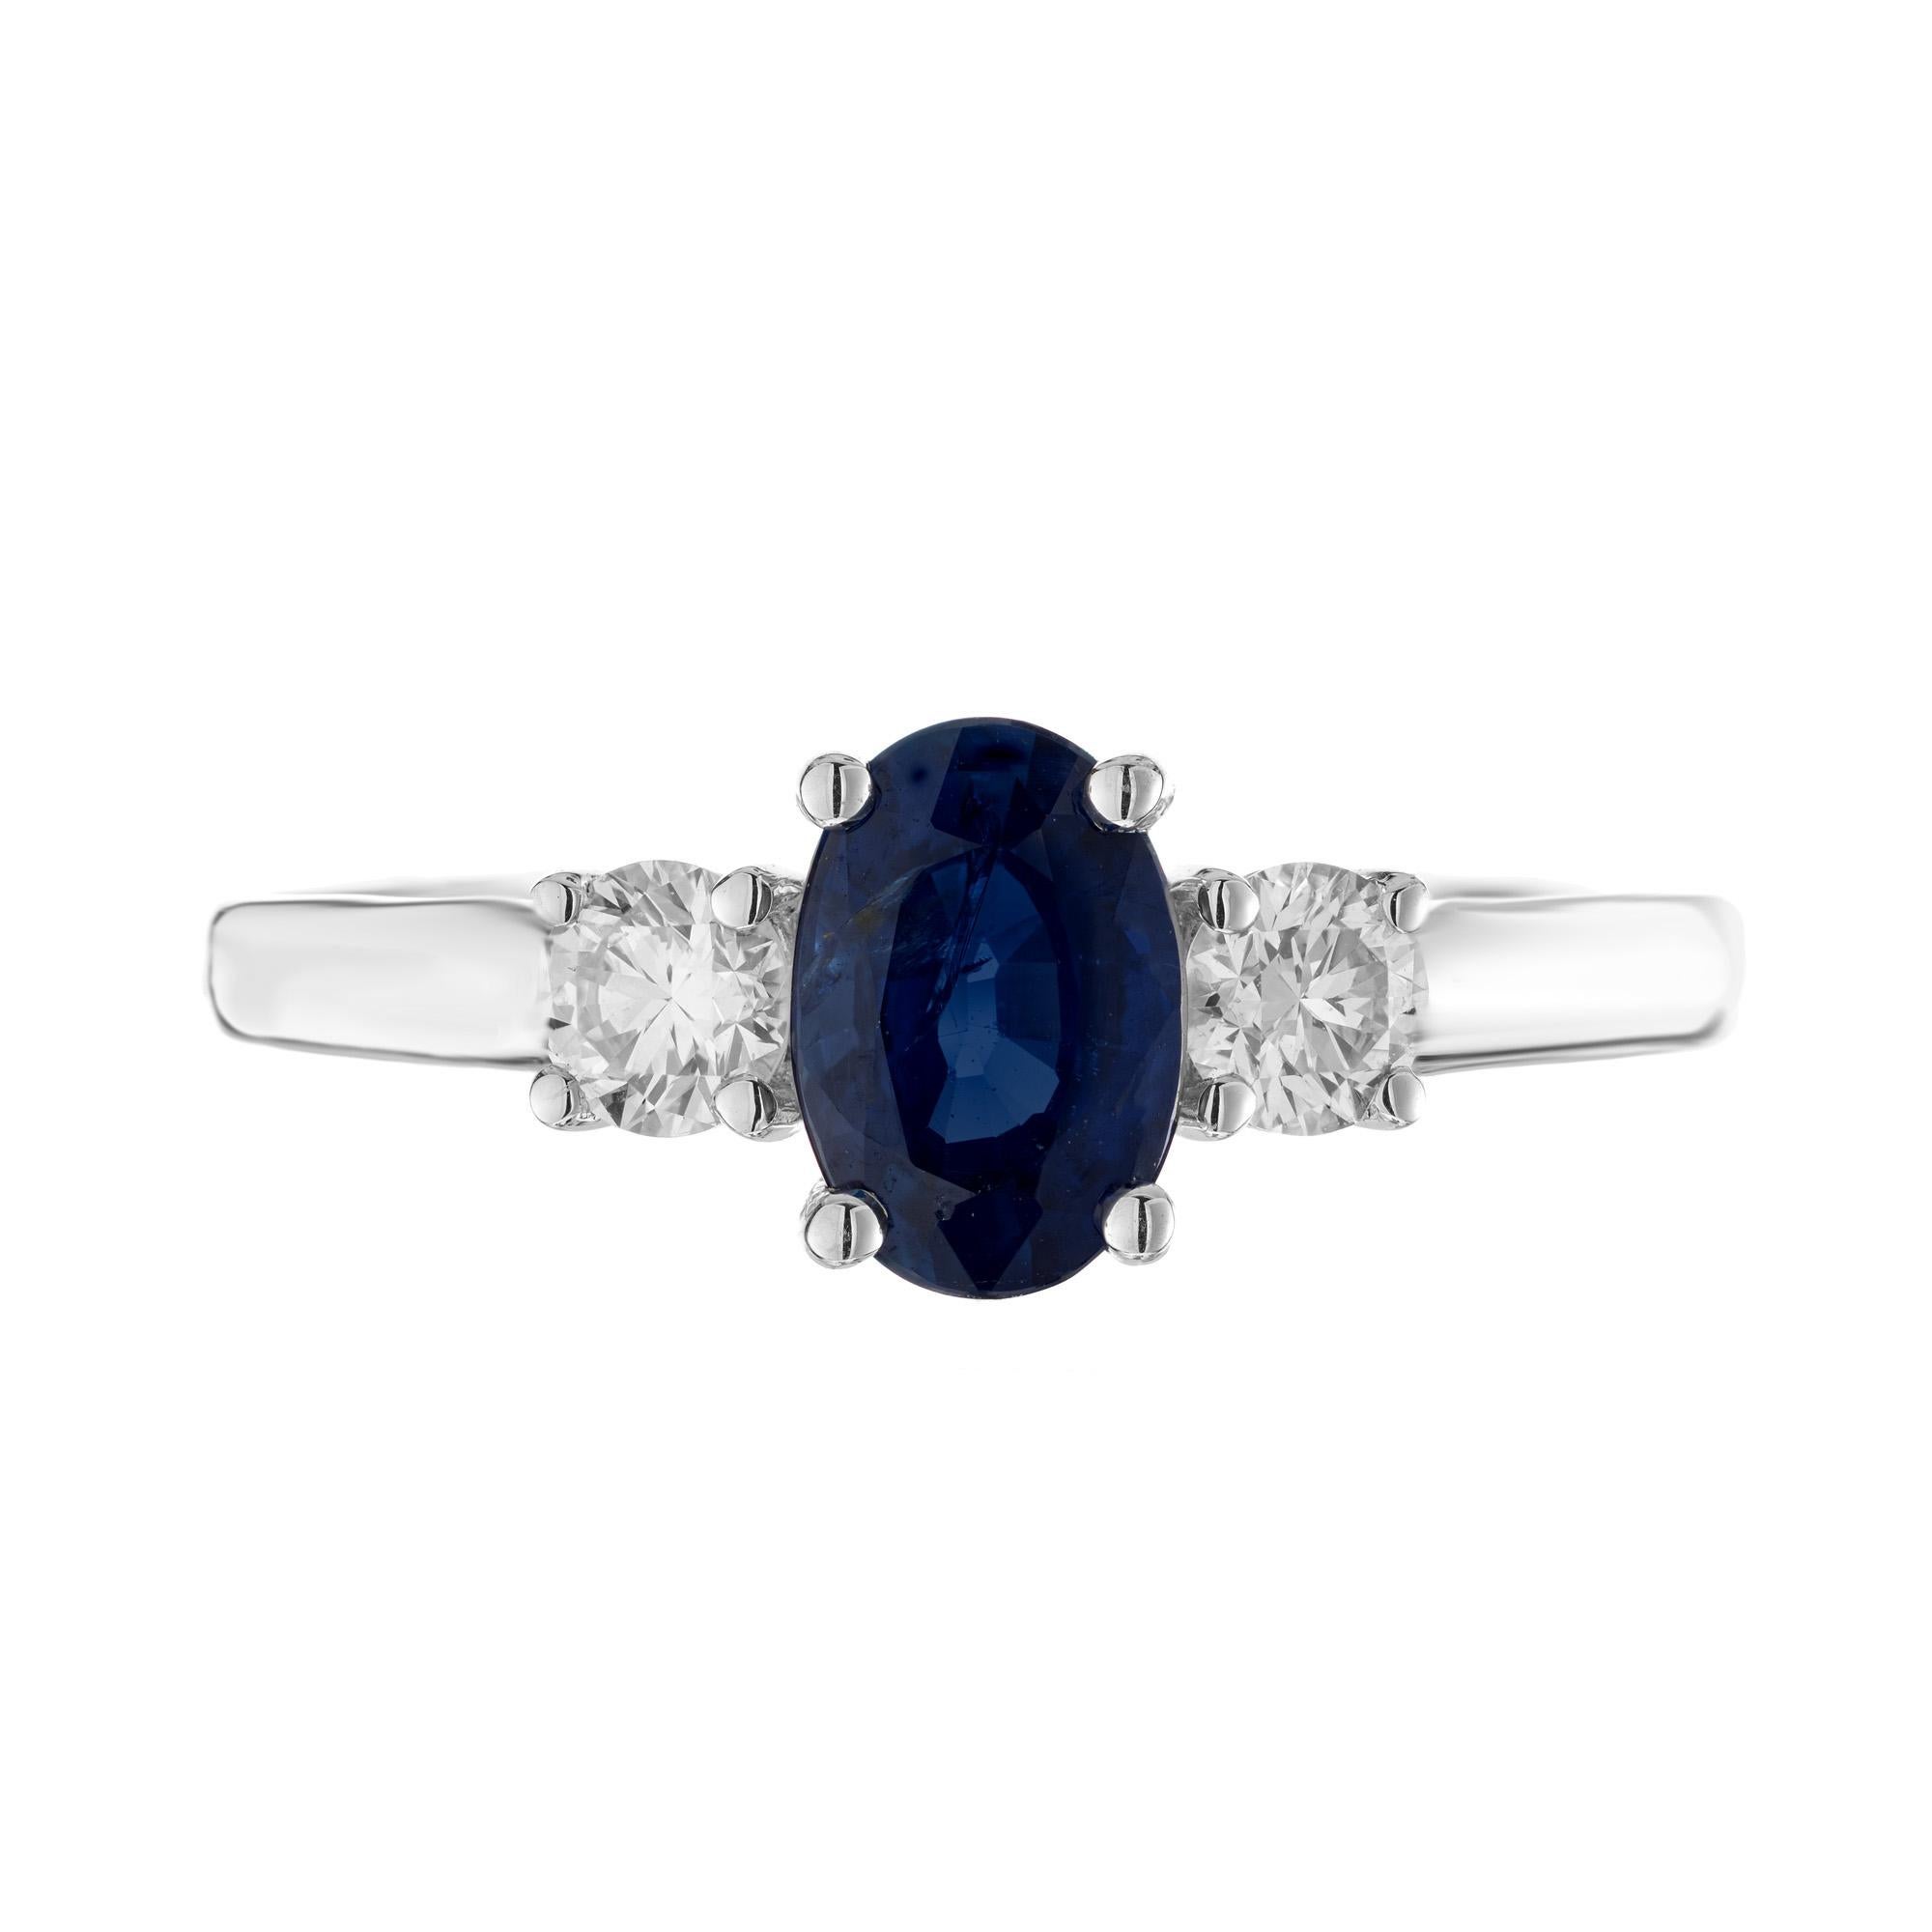 Sapphire and Diamond three stone engagement ring. This simple classic design begins with a GIA certified .97ct oval sapphire mounted in 18k white gold setting. Certified by the GIA as natural, no heat. The sapphire radiates a rich blue warm color.